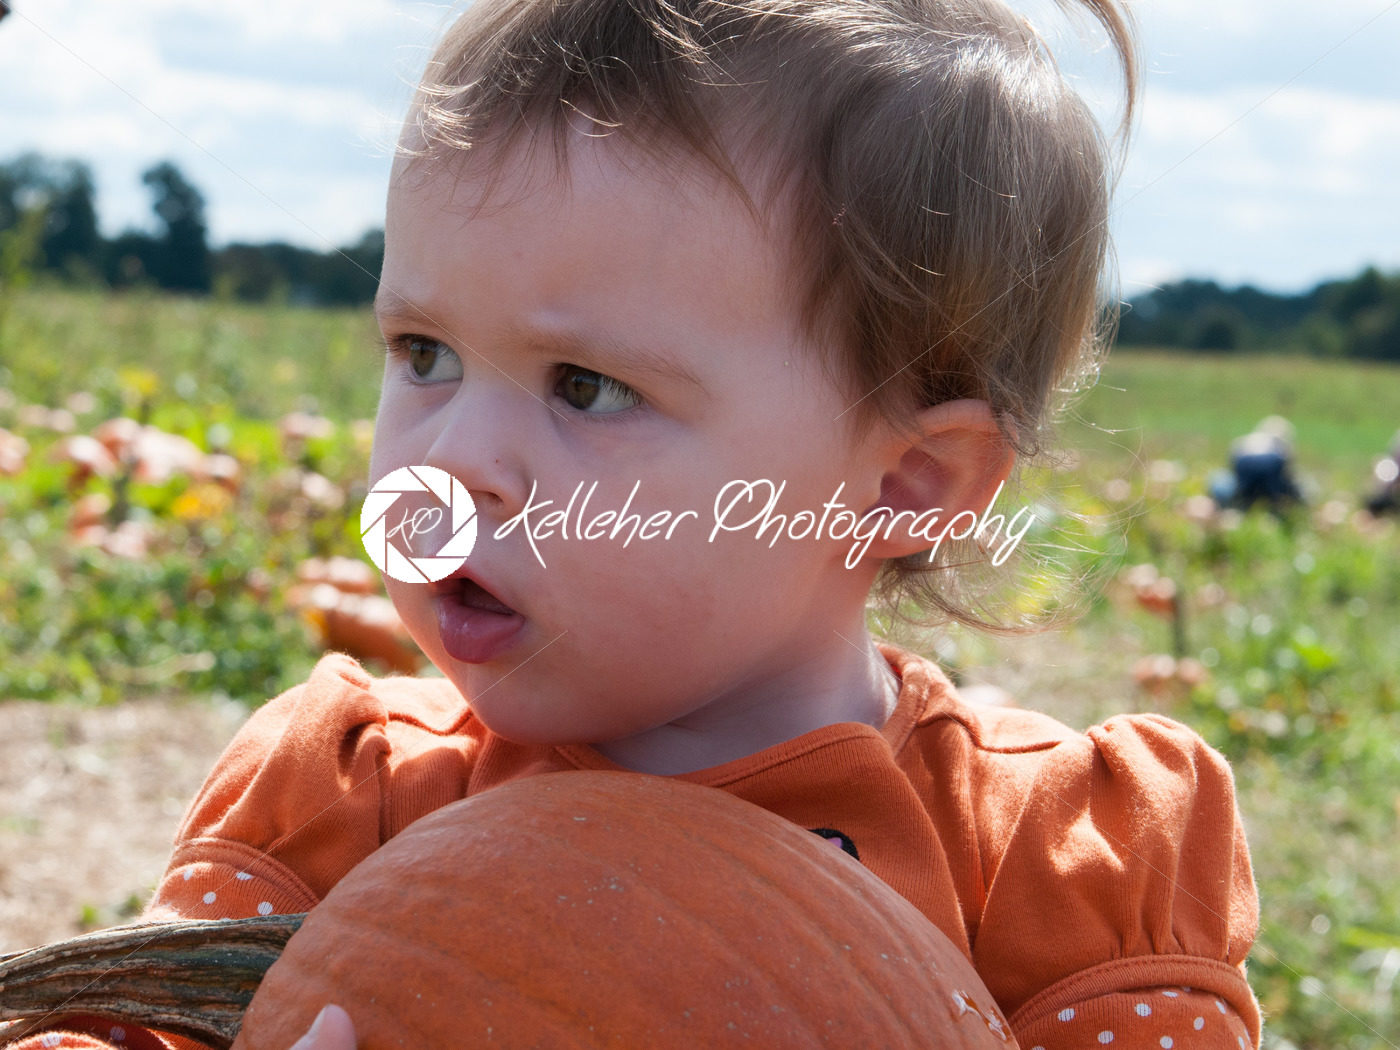 Young toddler girl outside holding a pumpkin with pumpkin fields in the background - Kelleher Photography Store